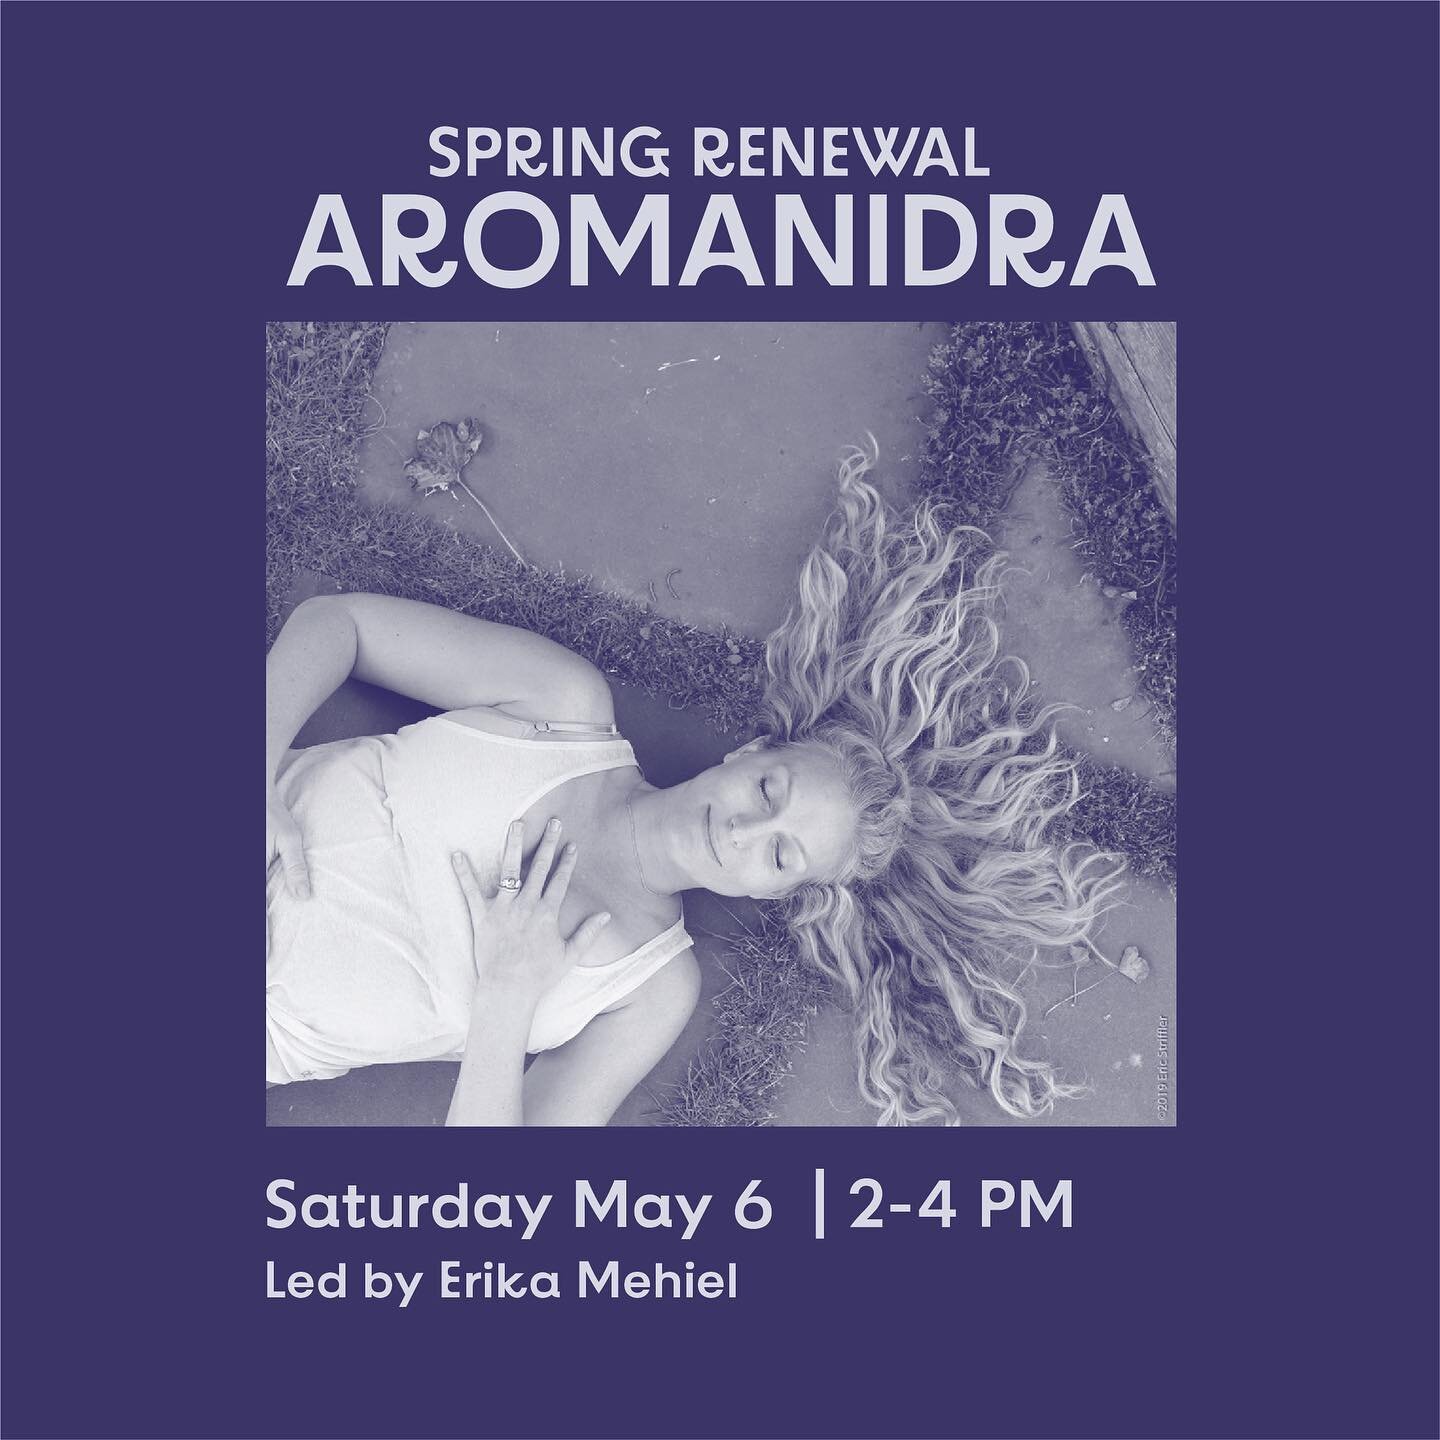 Join us this Saturday May 6, 2-4 PM for an amazing workshop - SPRING RENEWAL AROMANIDRA led by @erikamehiel 
.

Align with the wisdom of nature. Spring is the optimum time to release stagnation and rekindle vitality. As we transition from the heavy, 